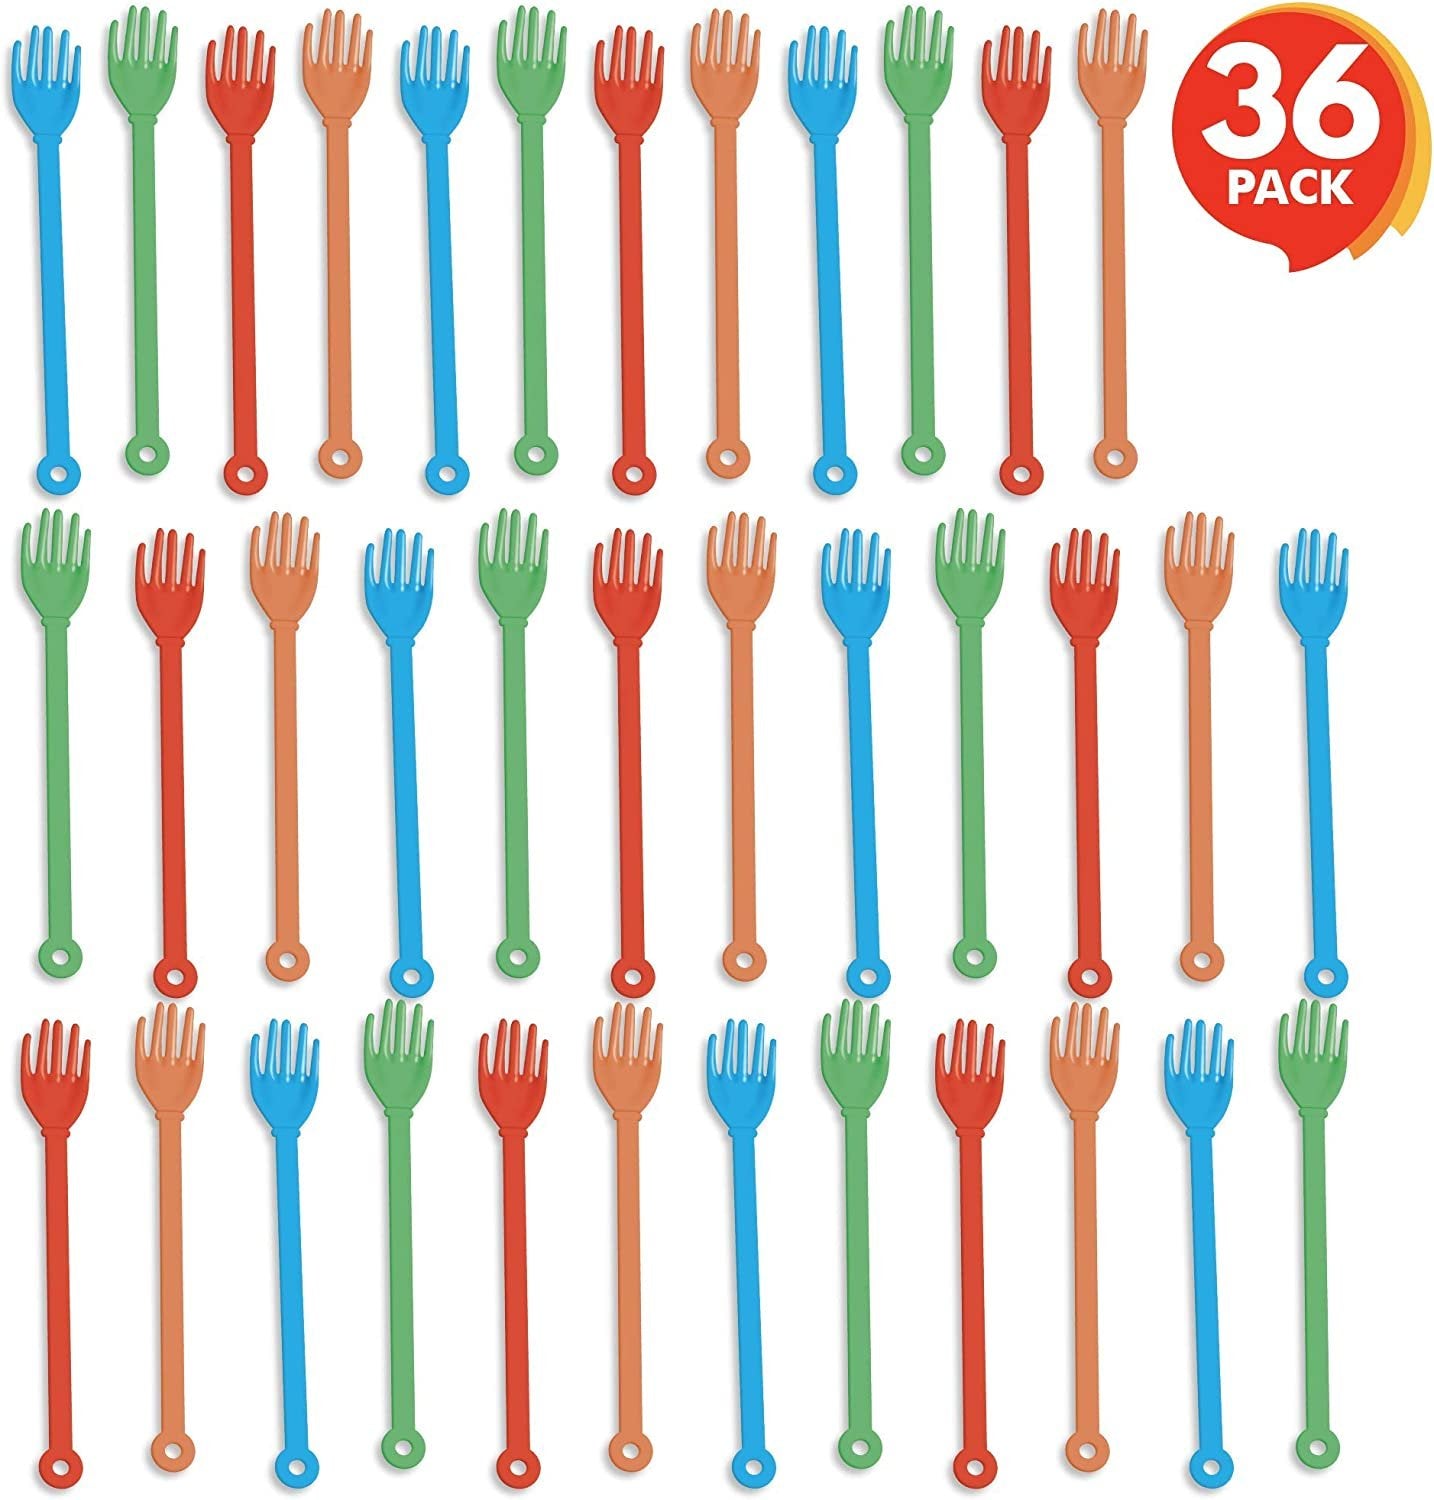 ArtCreativity Traditional Plastic Backscratchers, Set of 36, Assorted Colors, Unique Birthday Party Favors for Boys and Girls, Cool Stocking Stuffers for Kids, Novelty Gag Gift